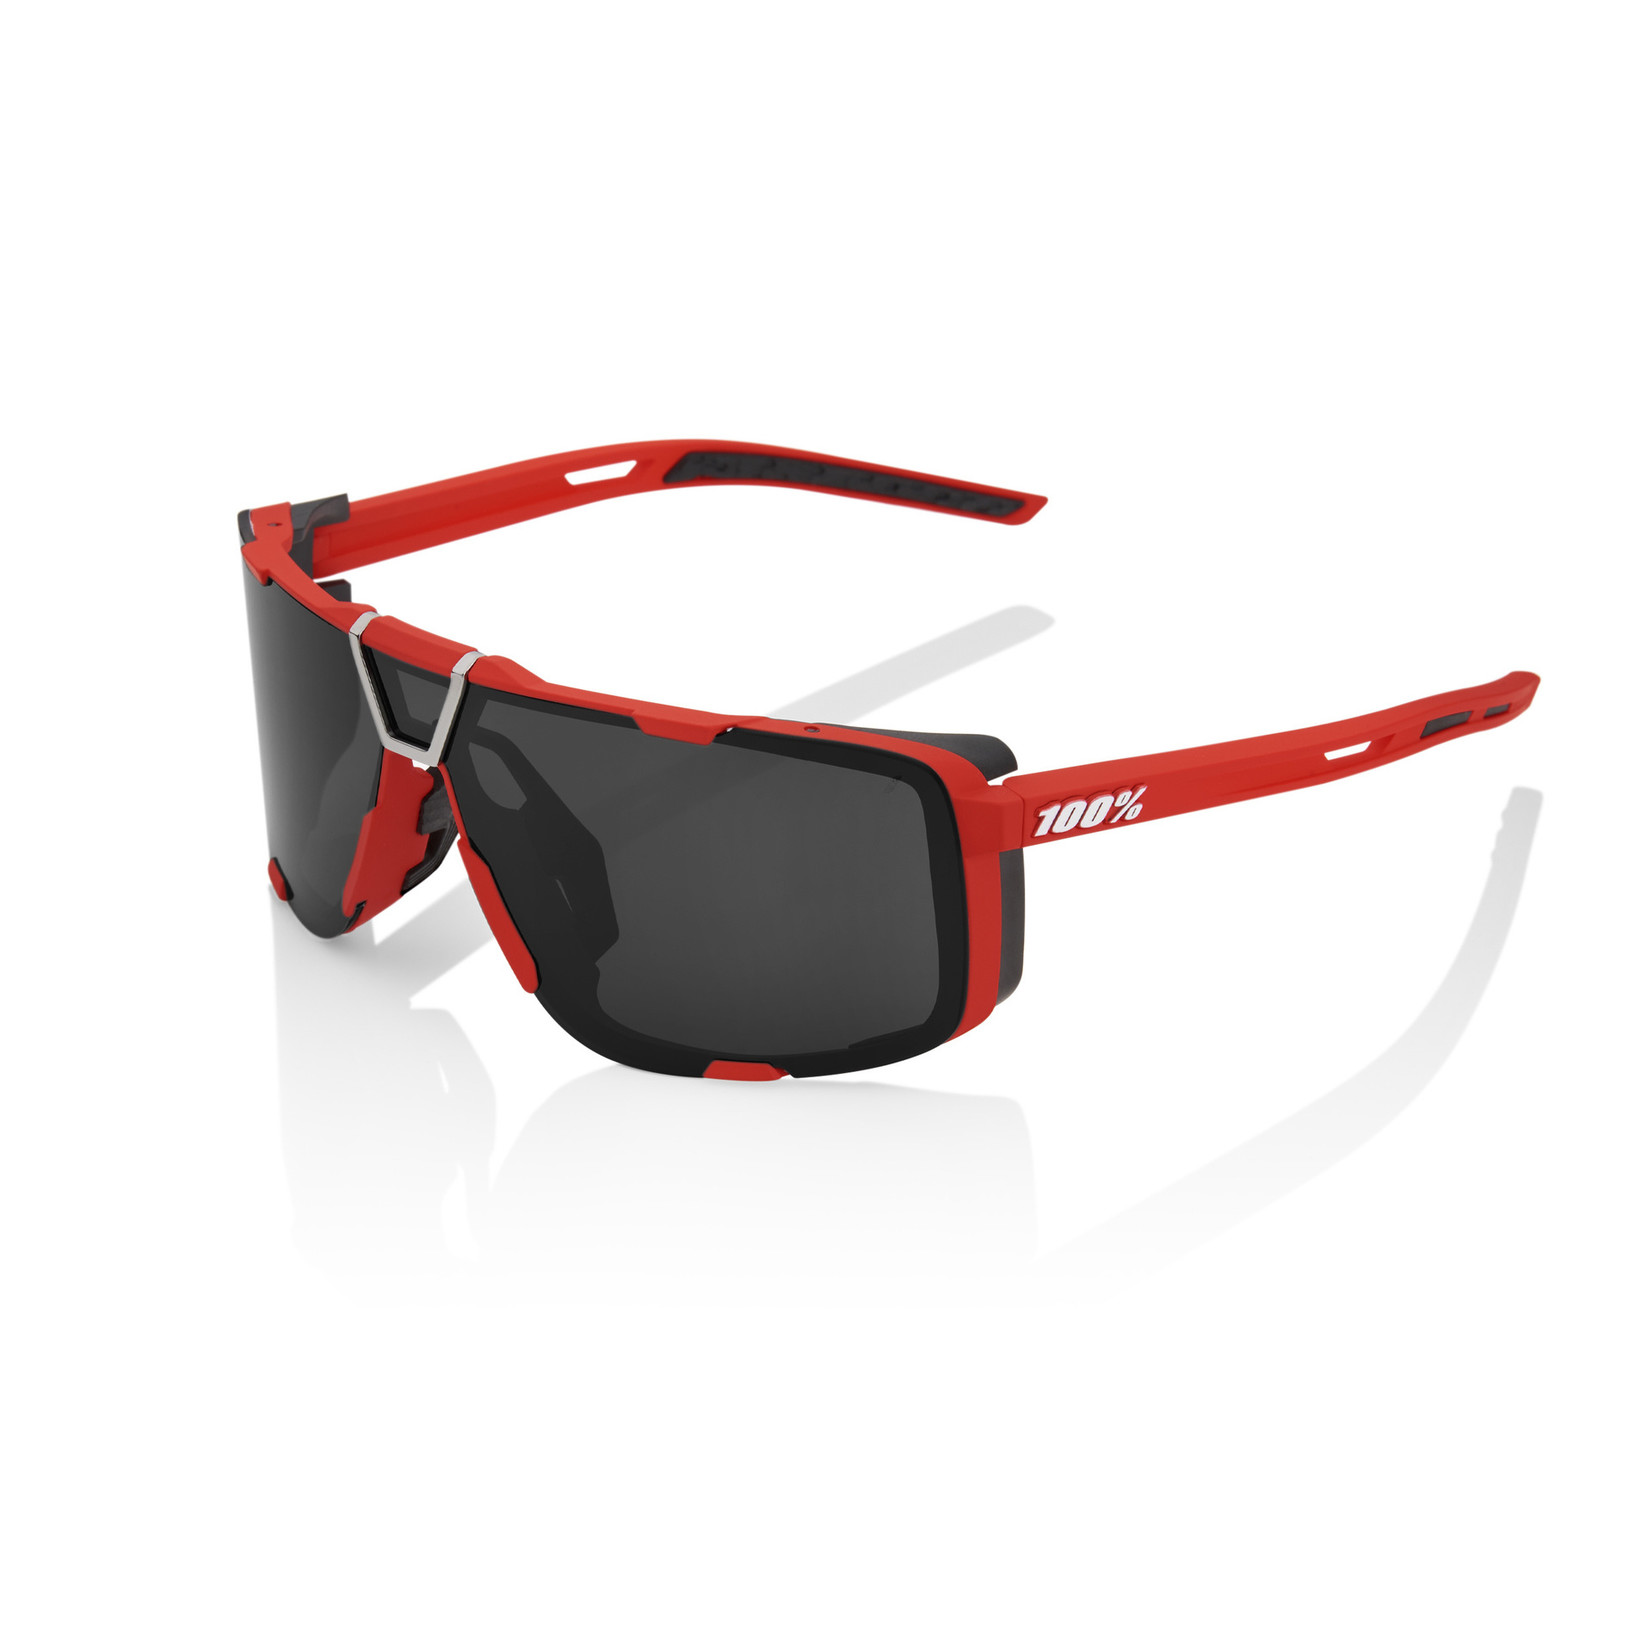 100 Percent Eastcraft Sunglasses, Soft Tact Red frame - Black Mirror Lens